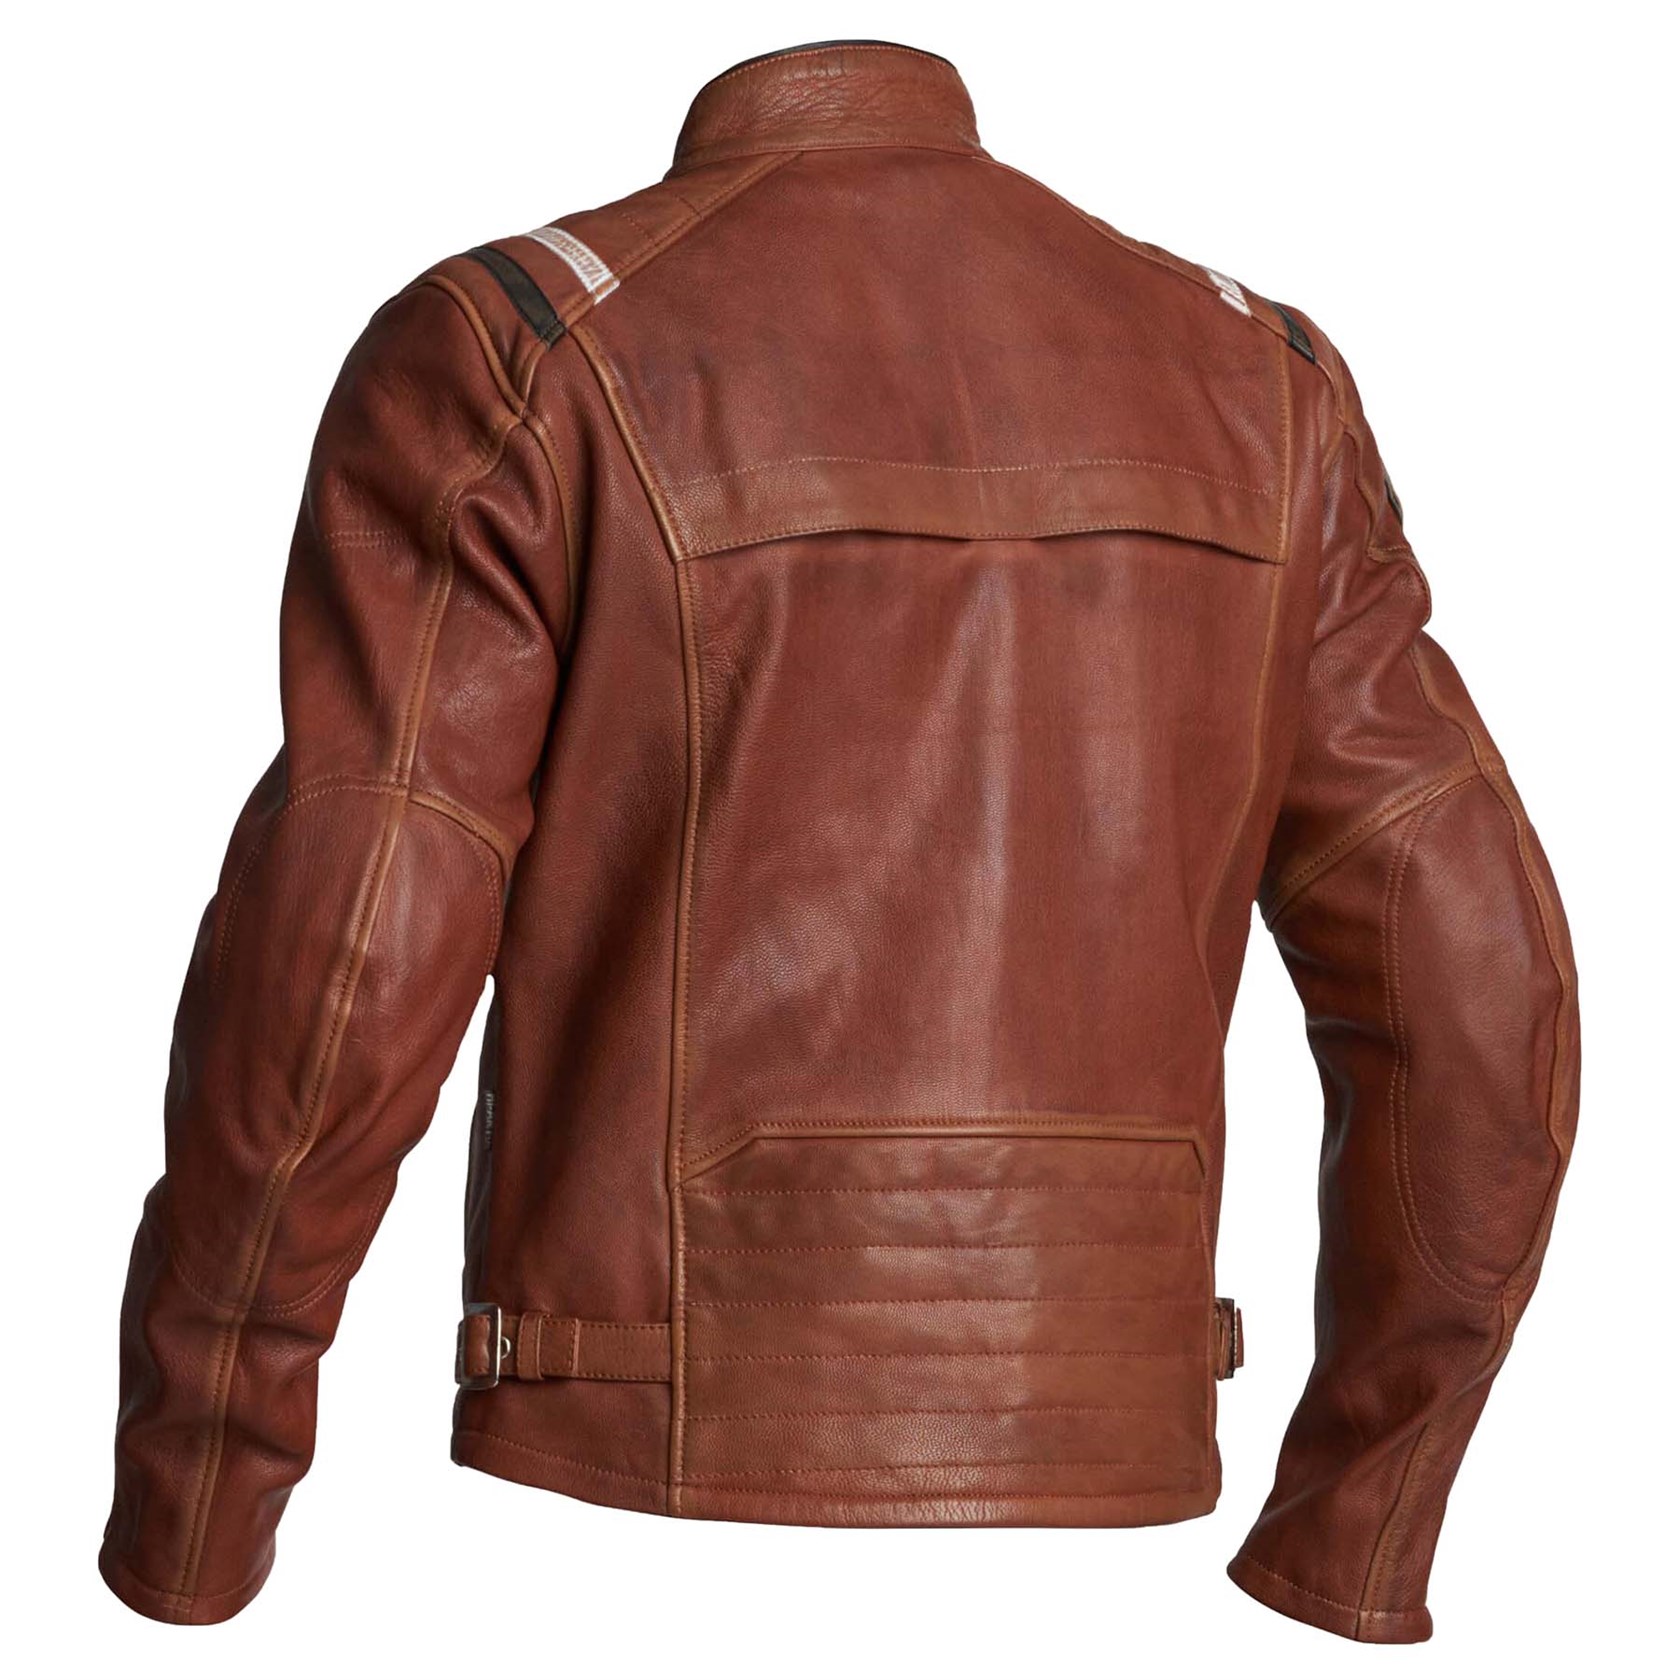 Men's Brown Leather Motorcycle Pants C500-12 - Open Road Leather